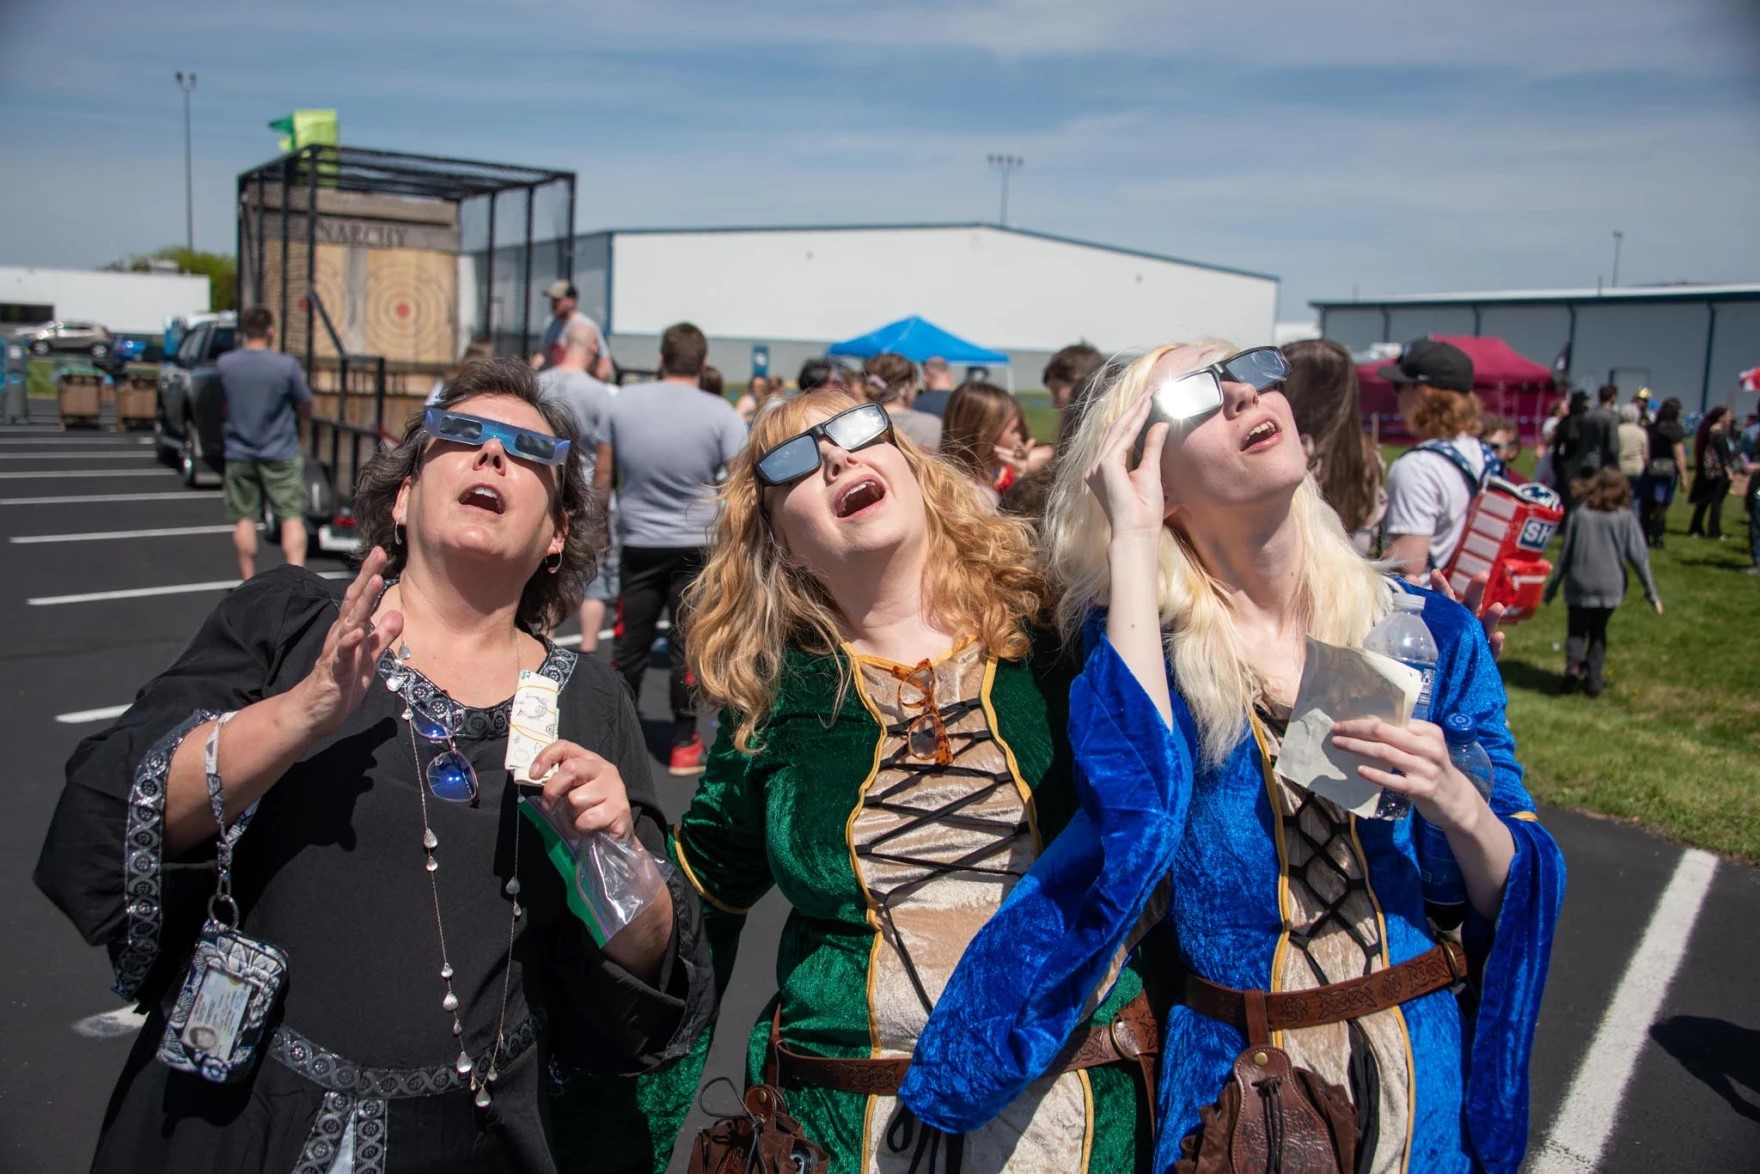 A group of women in Columbus said they came specifically because the event was both an eclipse viewing party and a Renaissance fair.